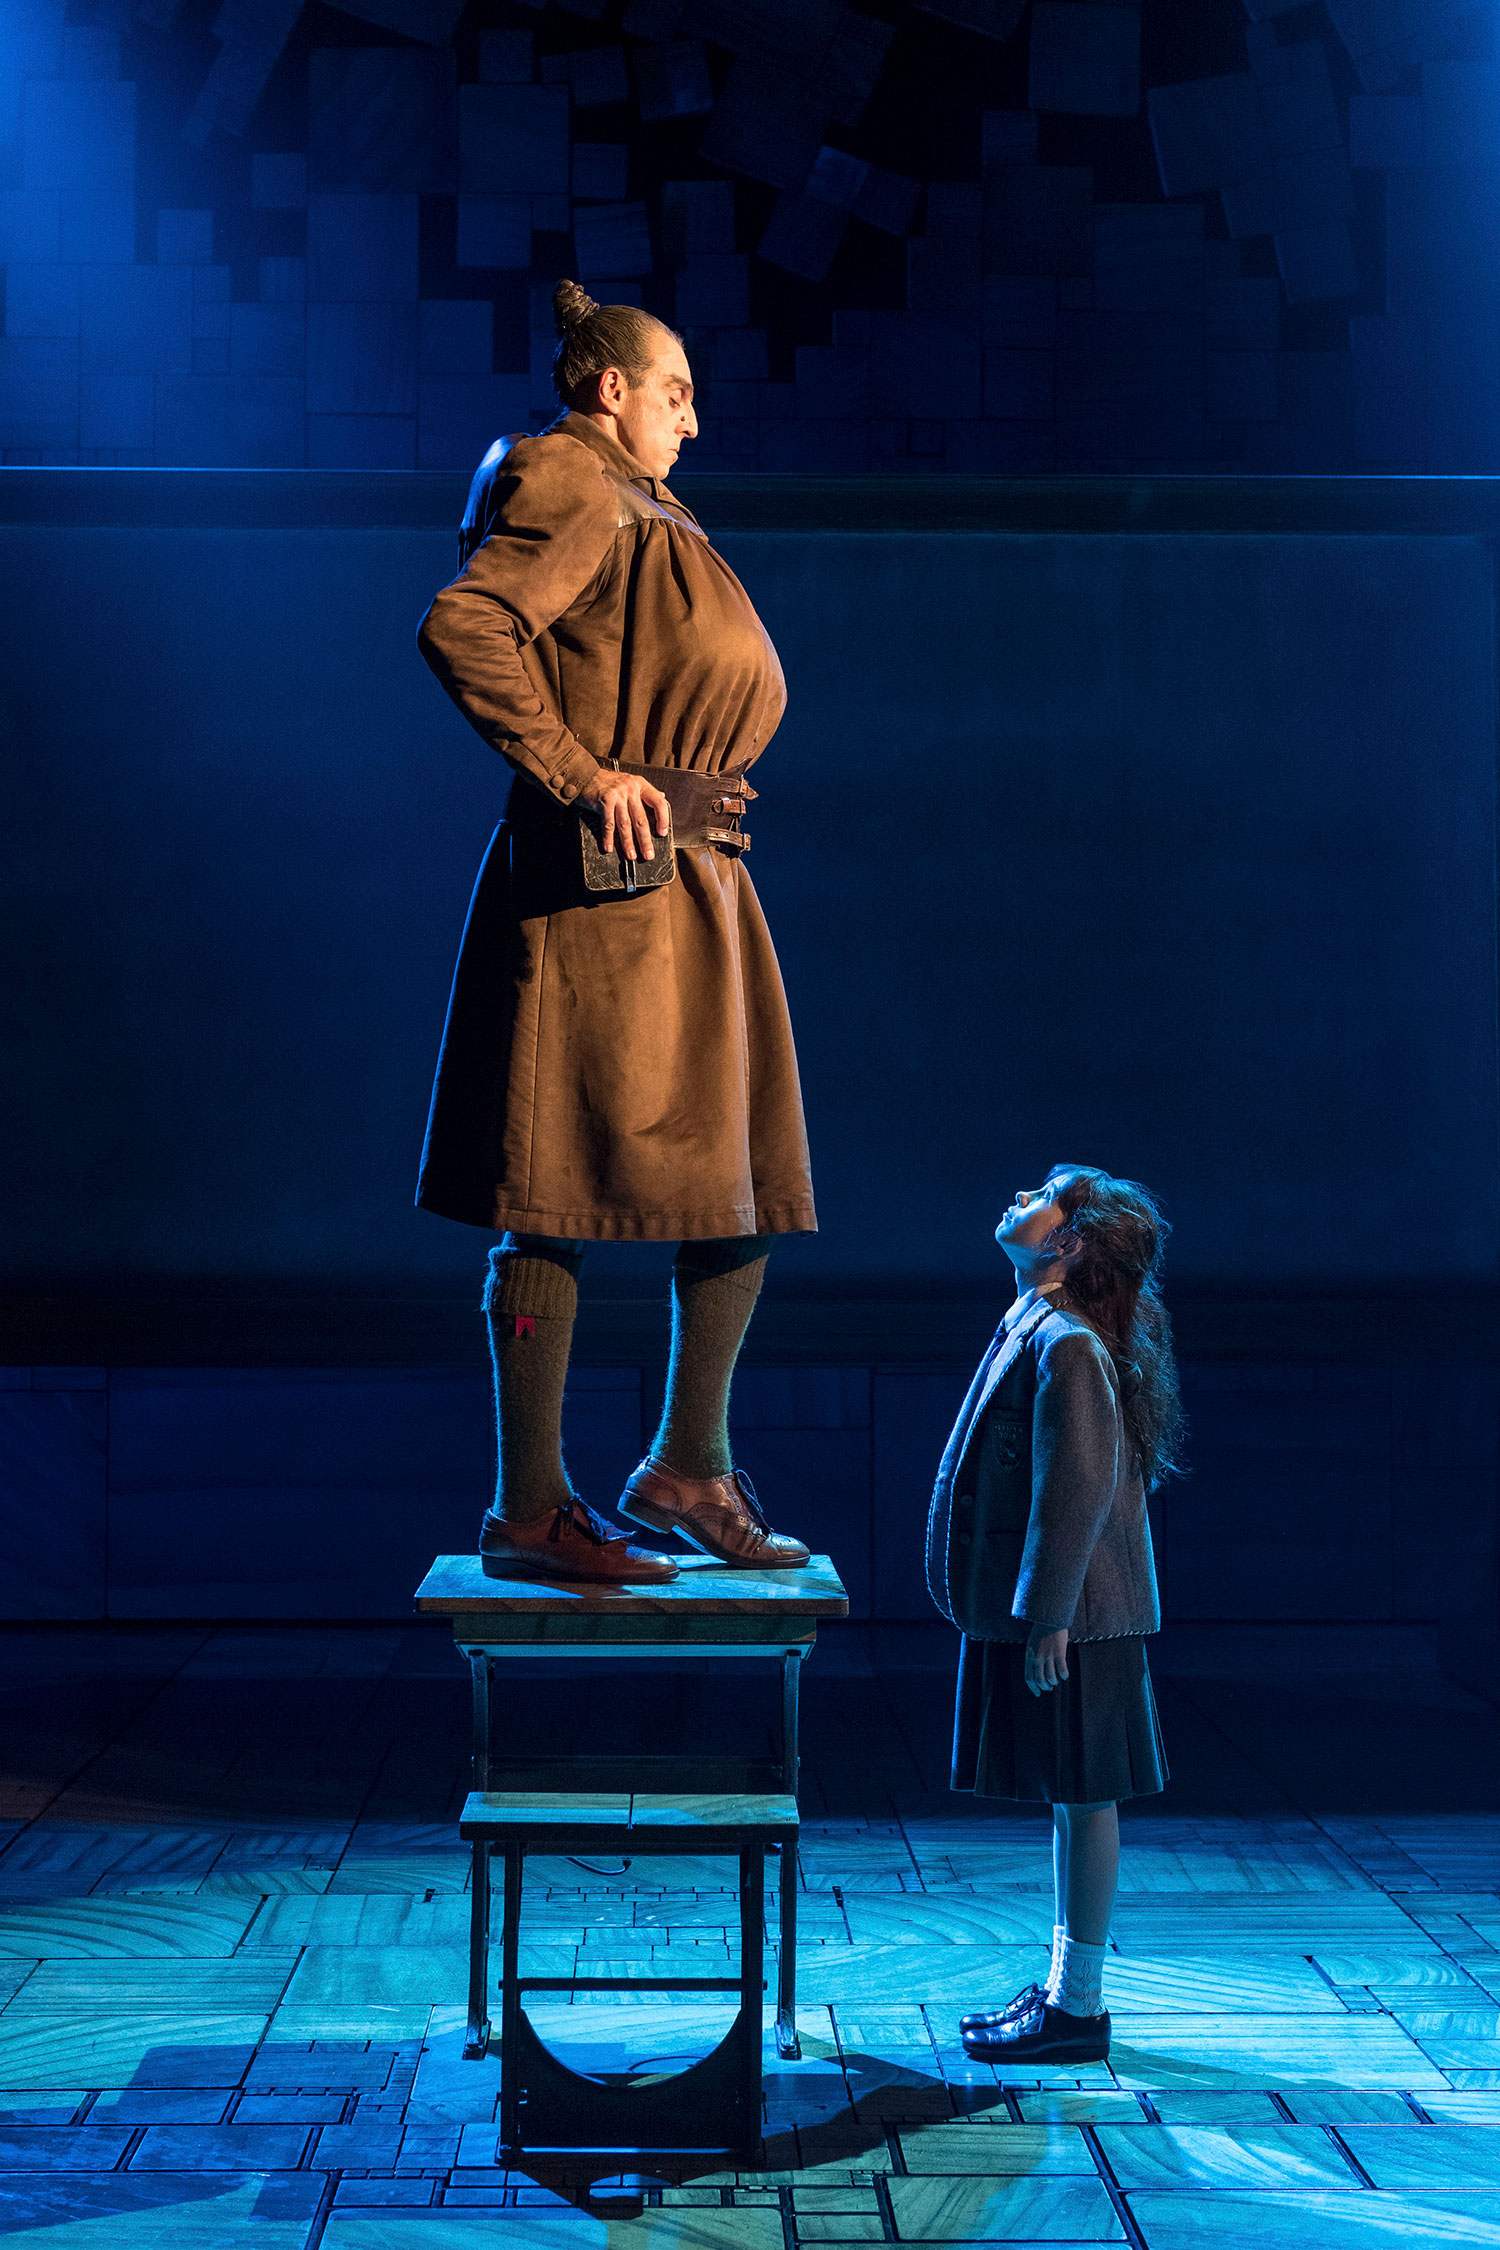 Matilda The Musical will make its debut in Singapore from 21 February 2019